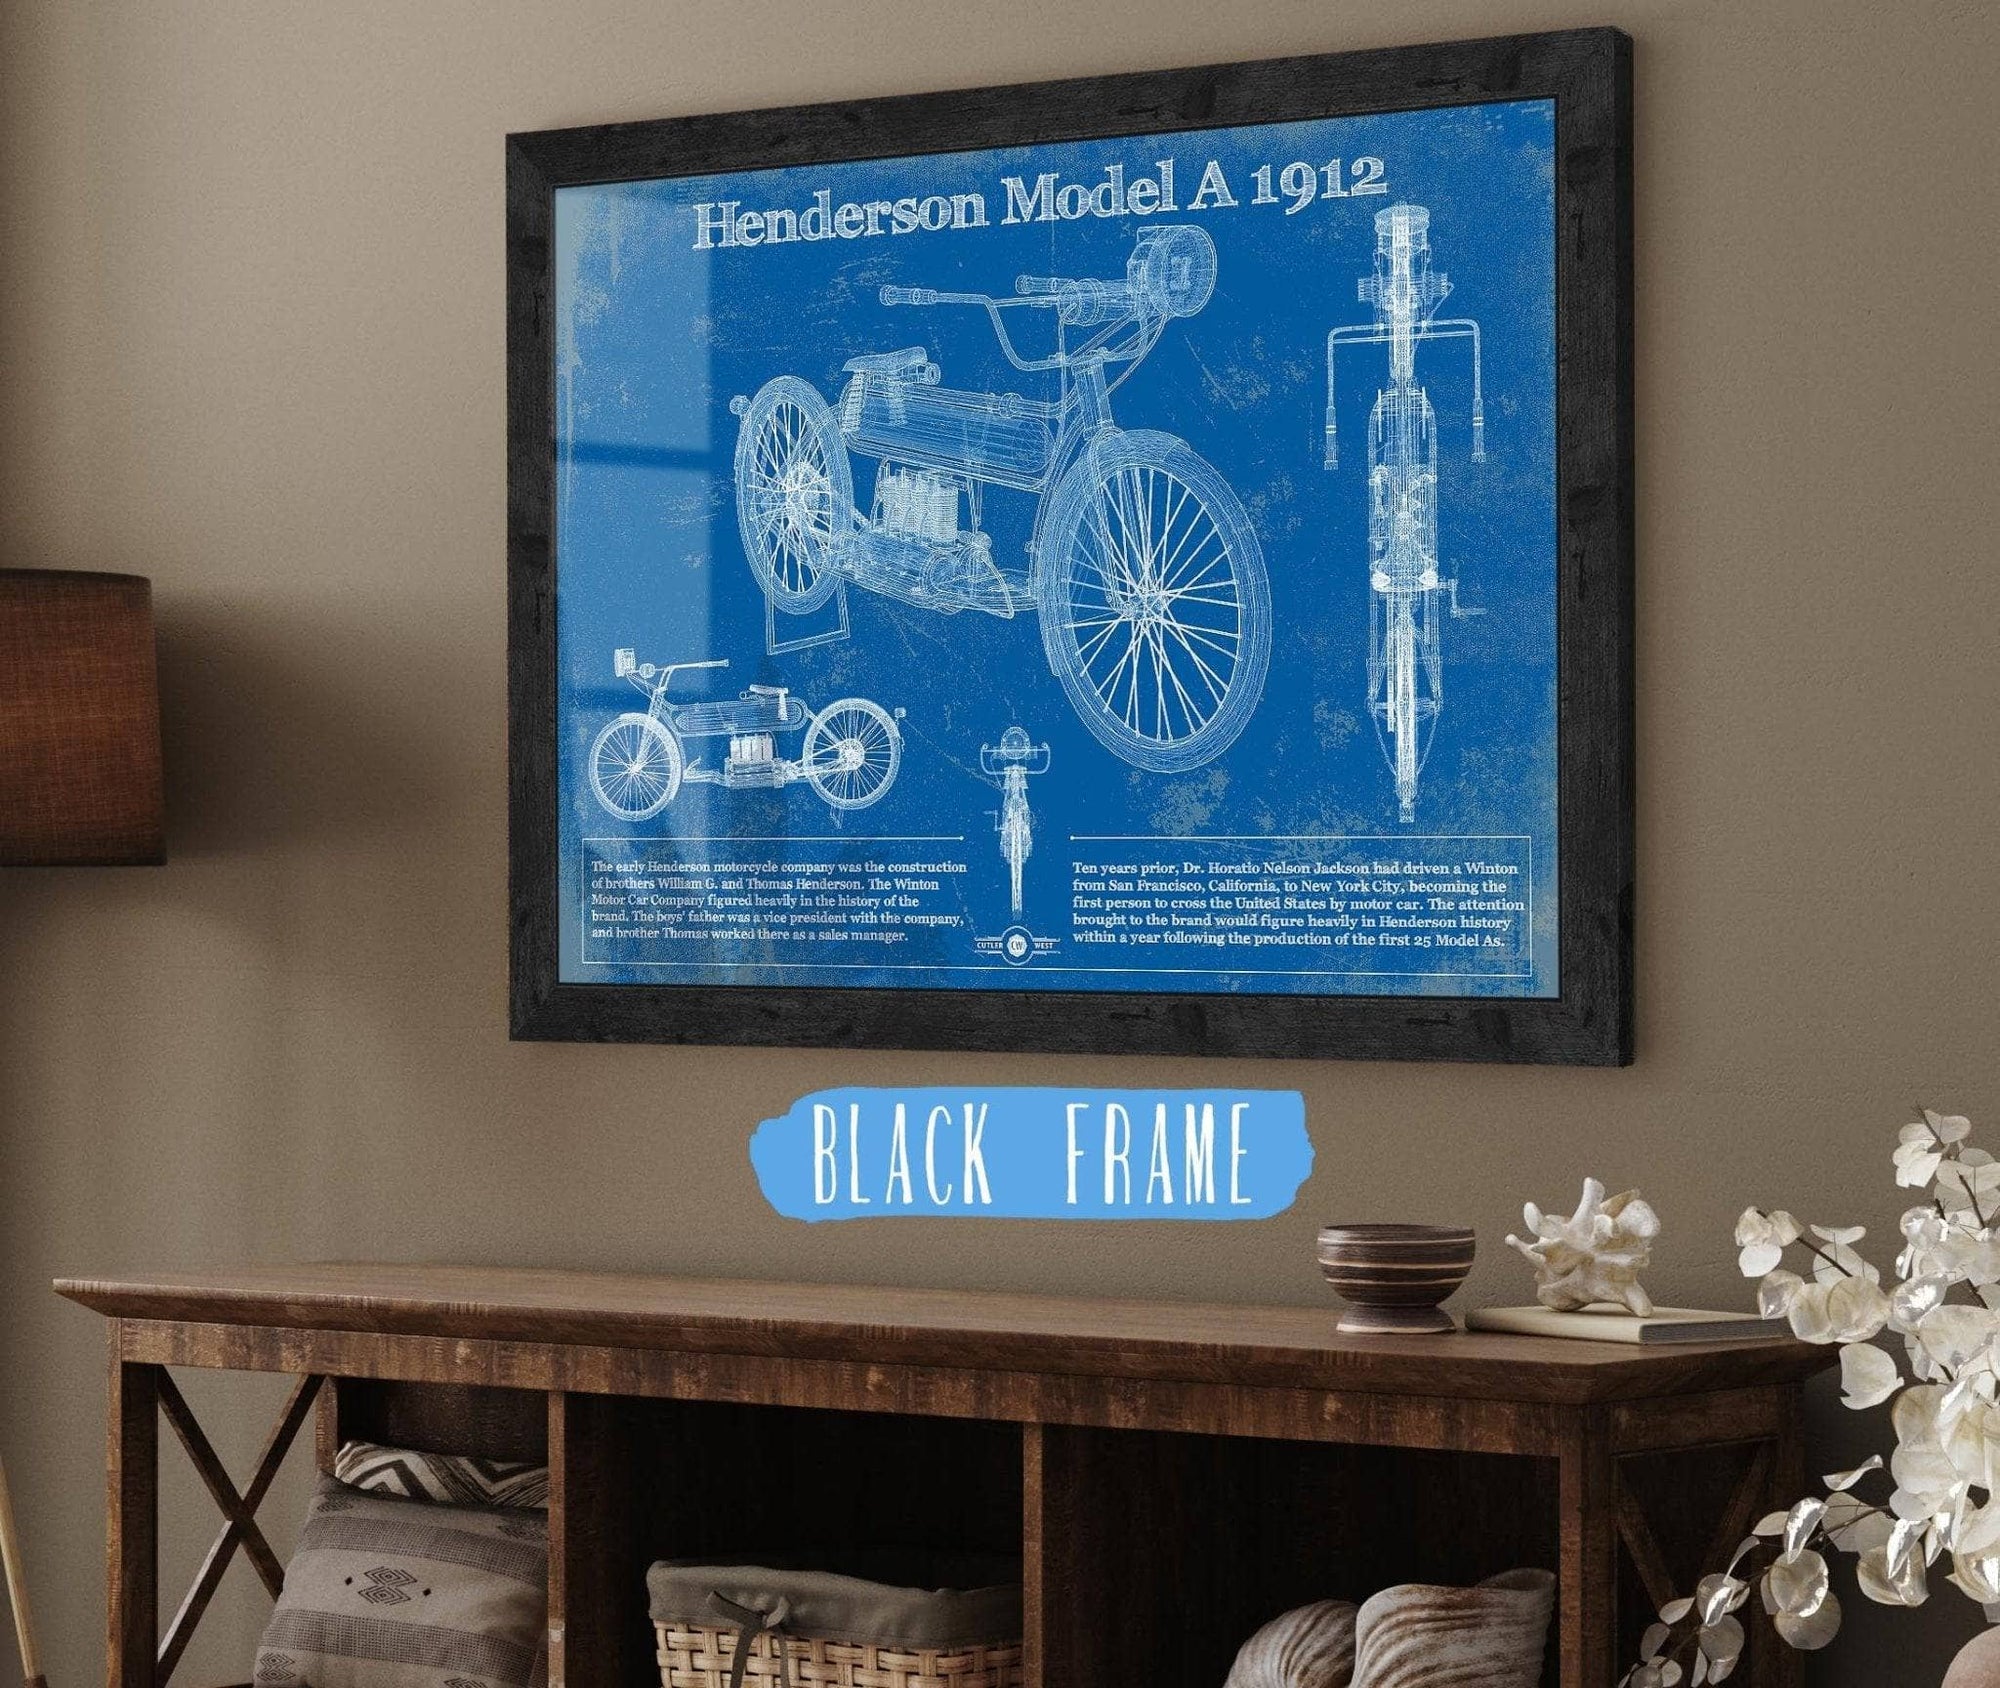 Cutler West 14" x 11" / Black Frame Henderson Model A 1912 Motorcycle Patent Print 945000345_63653